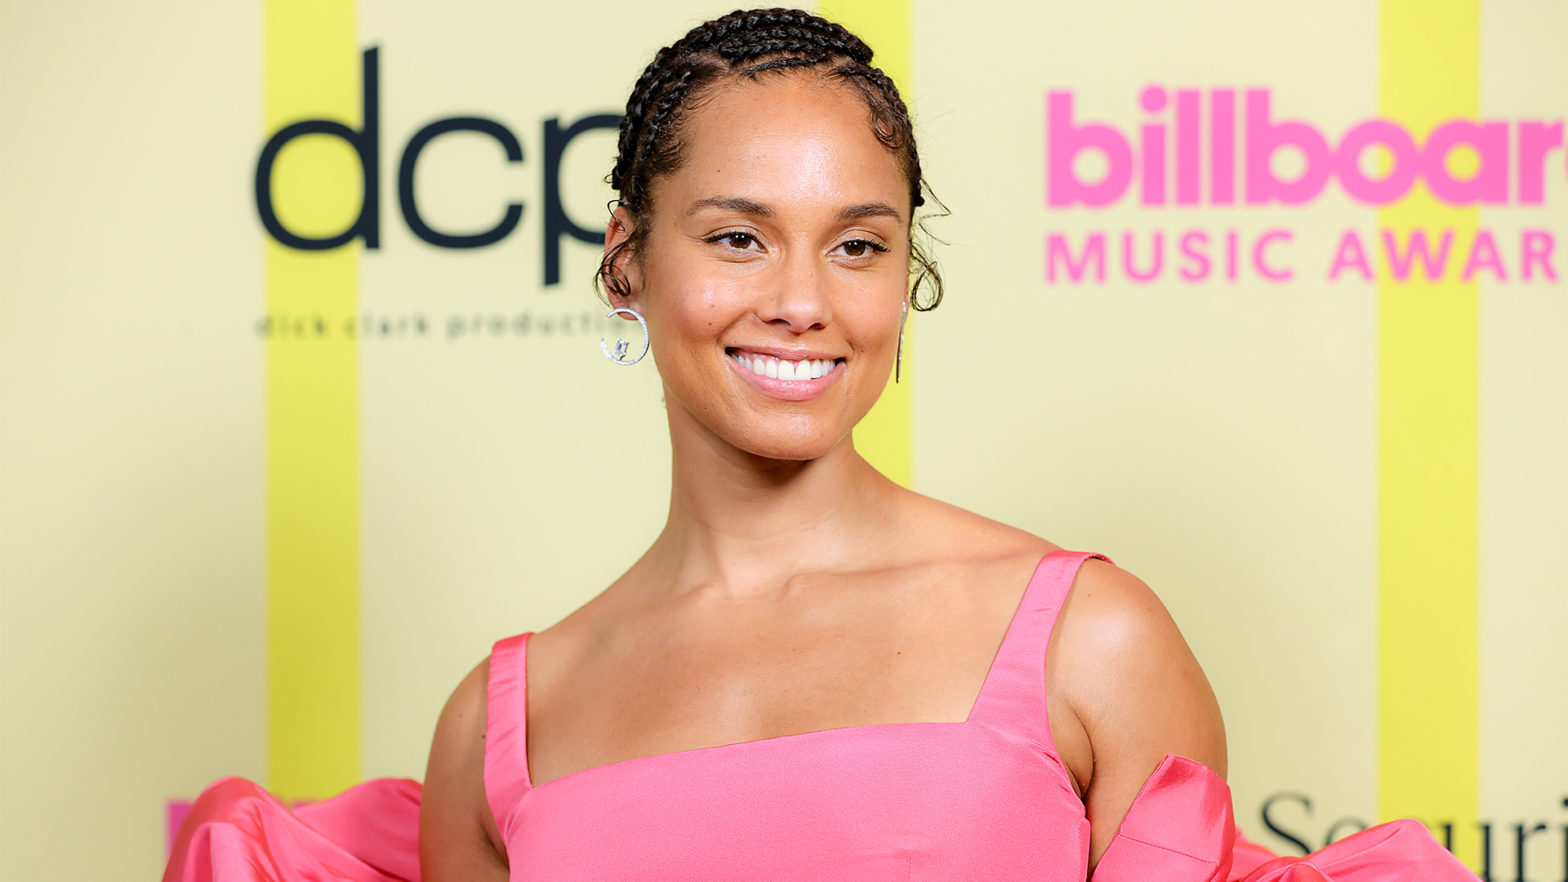 How Alicia Keys Proved 'A Woman's Worth' Of $150M Across The Music Industry And Beyond